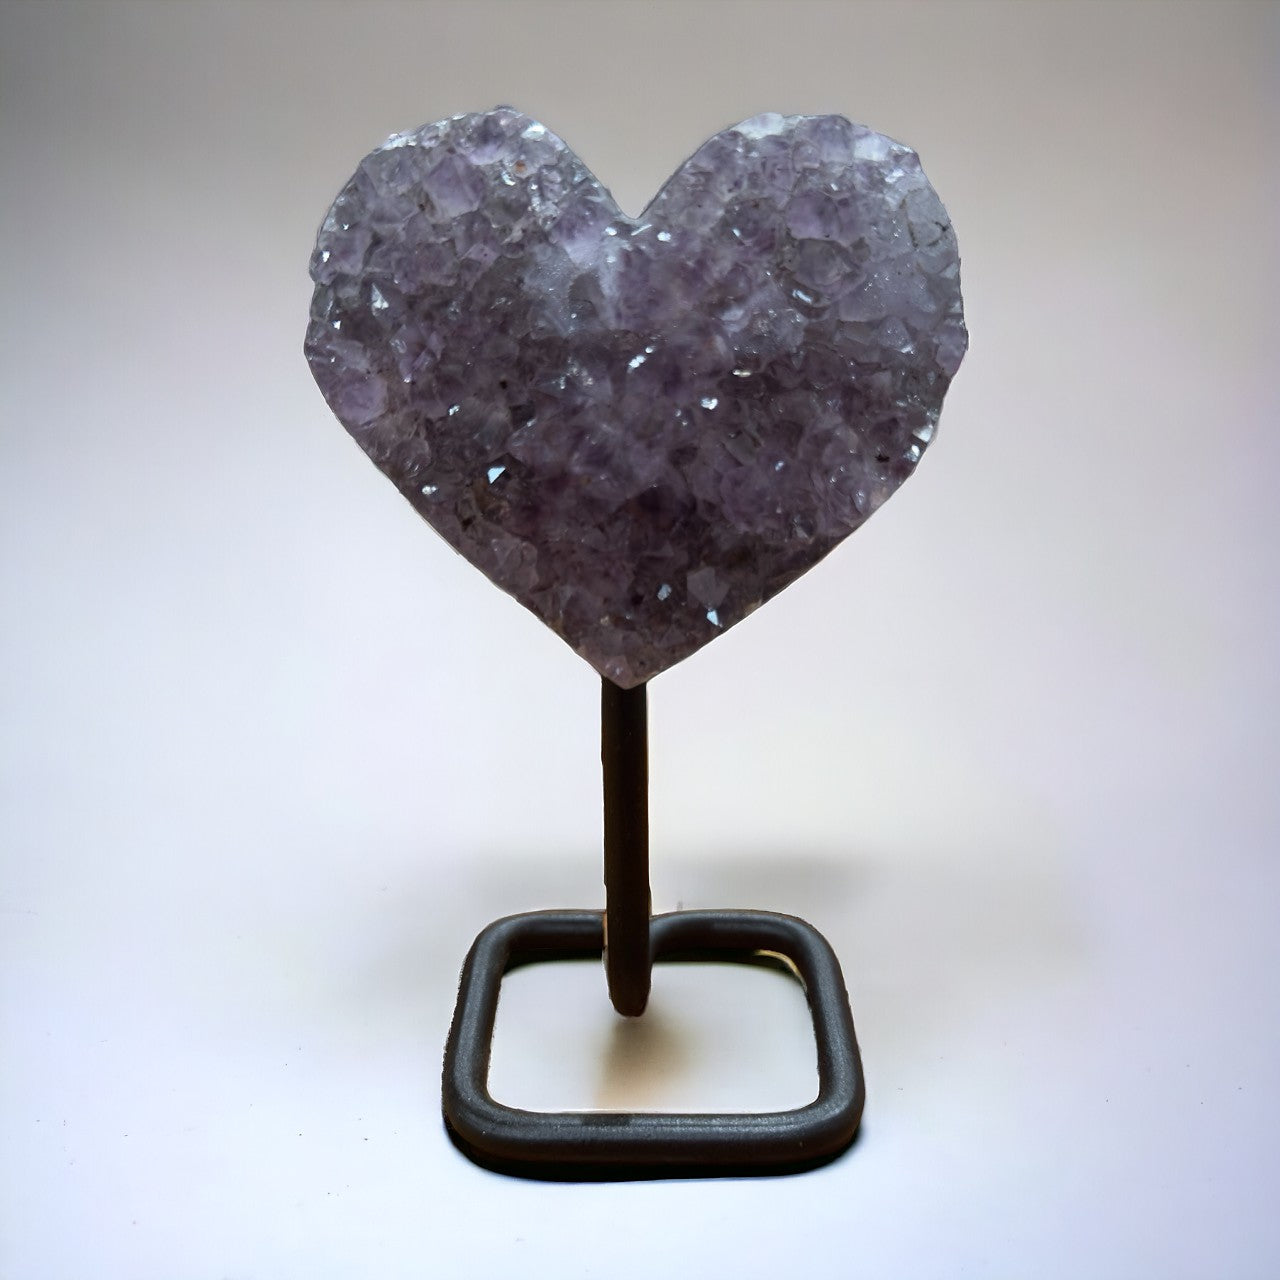 Amethyst Cluster Heart on Stand | 254g